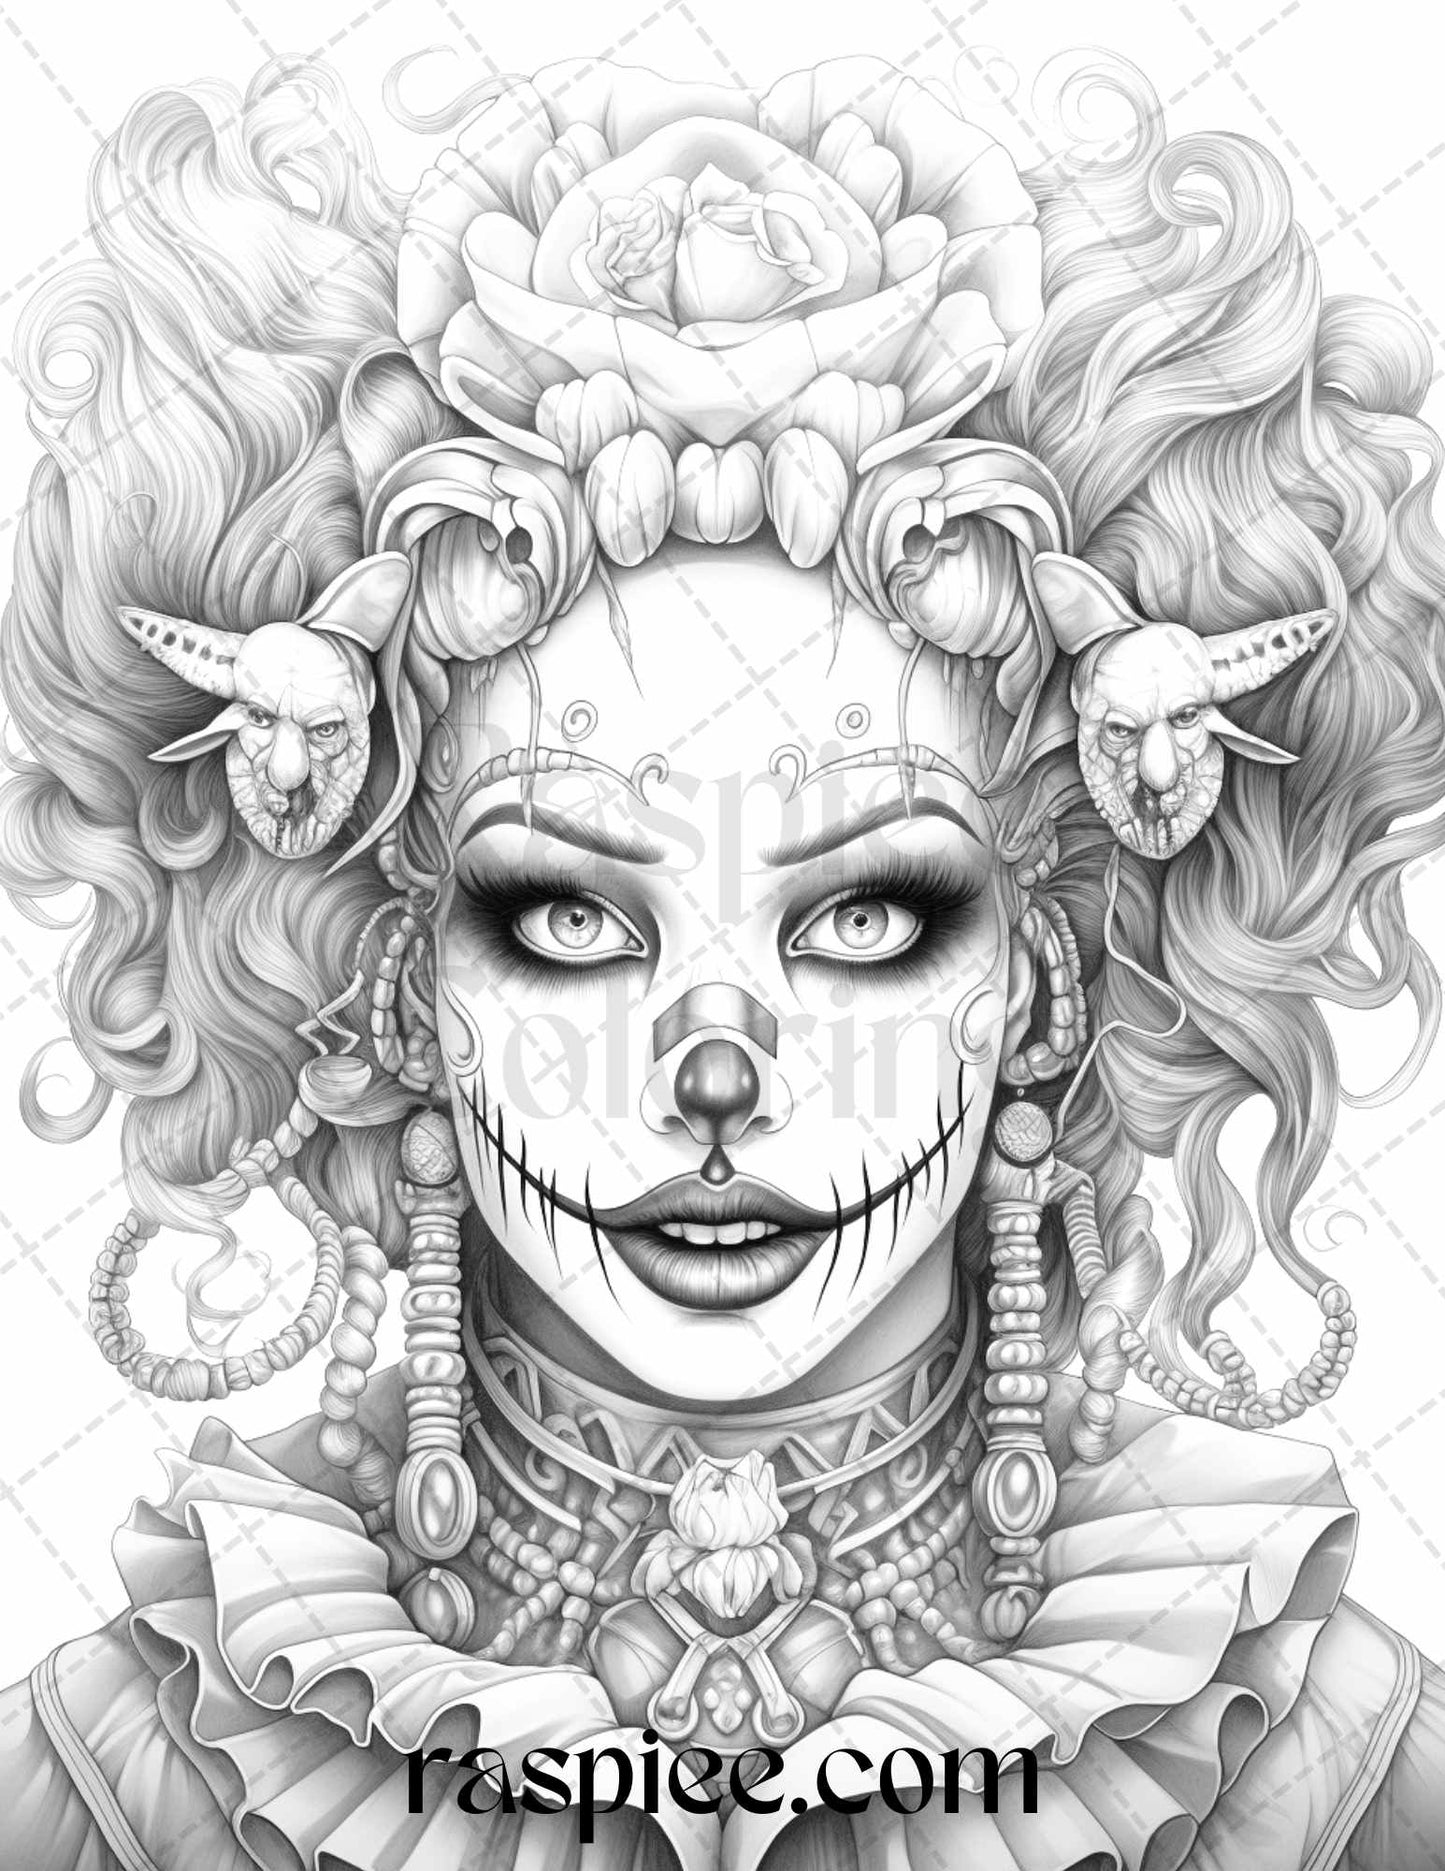 scary clown coloring pages, grayscale coloring pages, girls coloring pages, printable coloring pages, adult coloring pages, Halloween coloring book, creepy coloring pages, horror coloring pages, dark art coloring pages, spooky coloring pages, haunted circus coloring pages, sinister clown art, macabre coloring pages, eerie coloring pages, gothic coloring pages